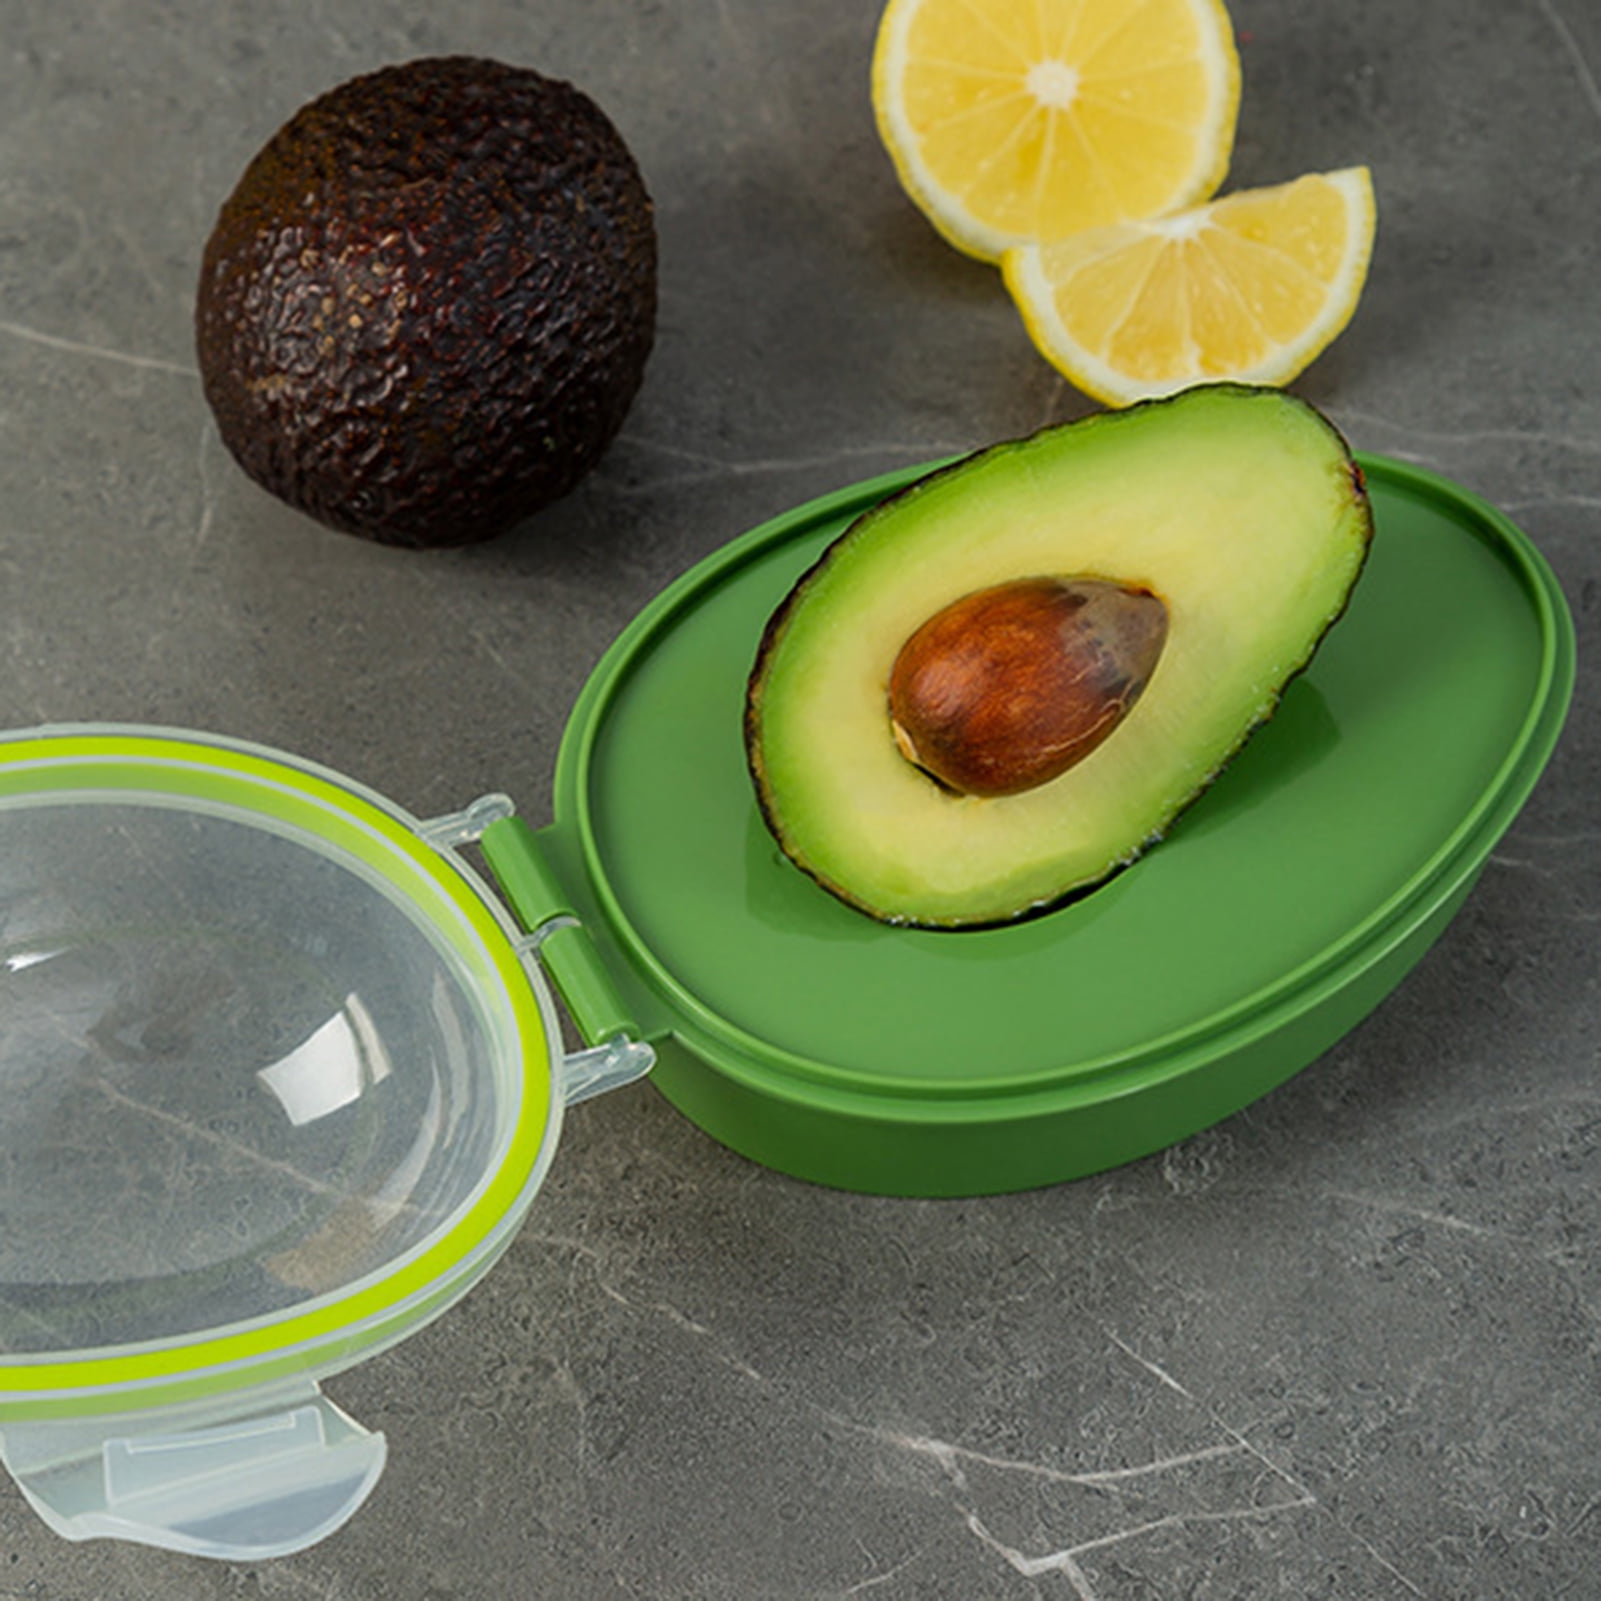 Avocado Keeper Review: This Gadget Keeps Produce Fresh for Days